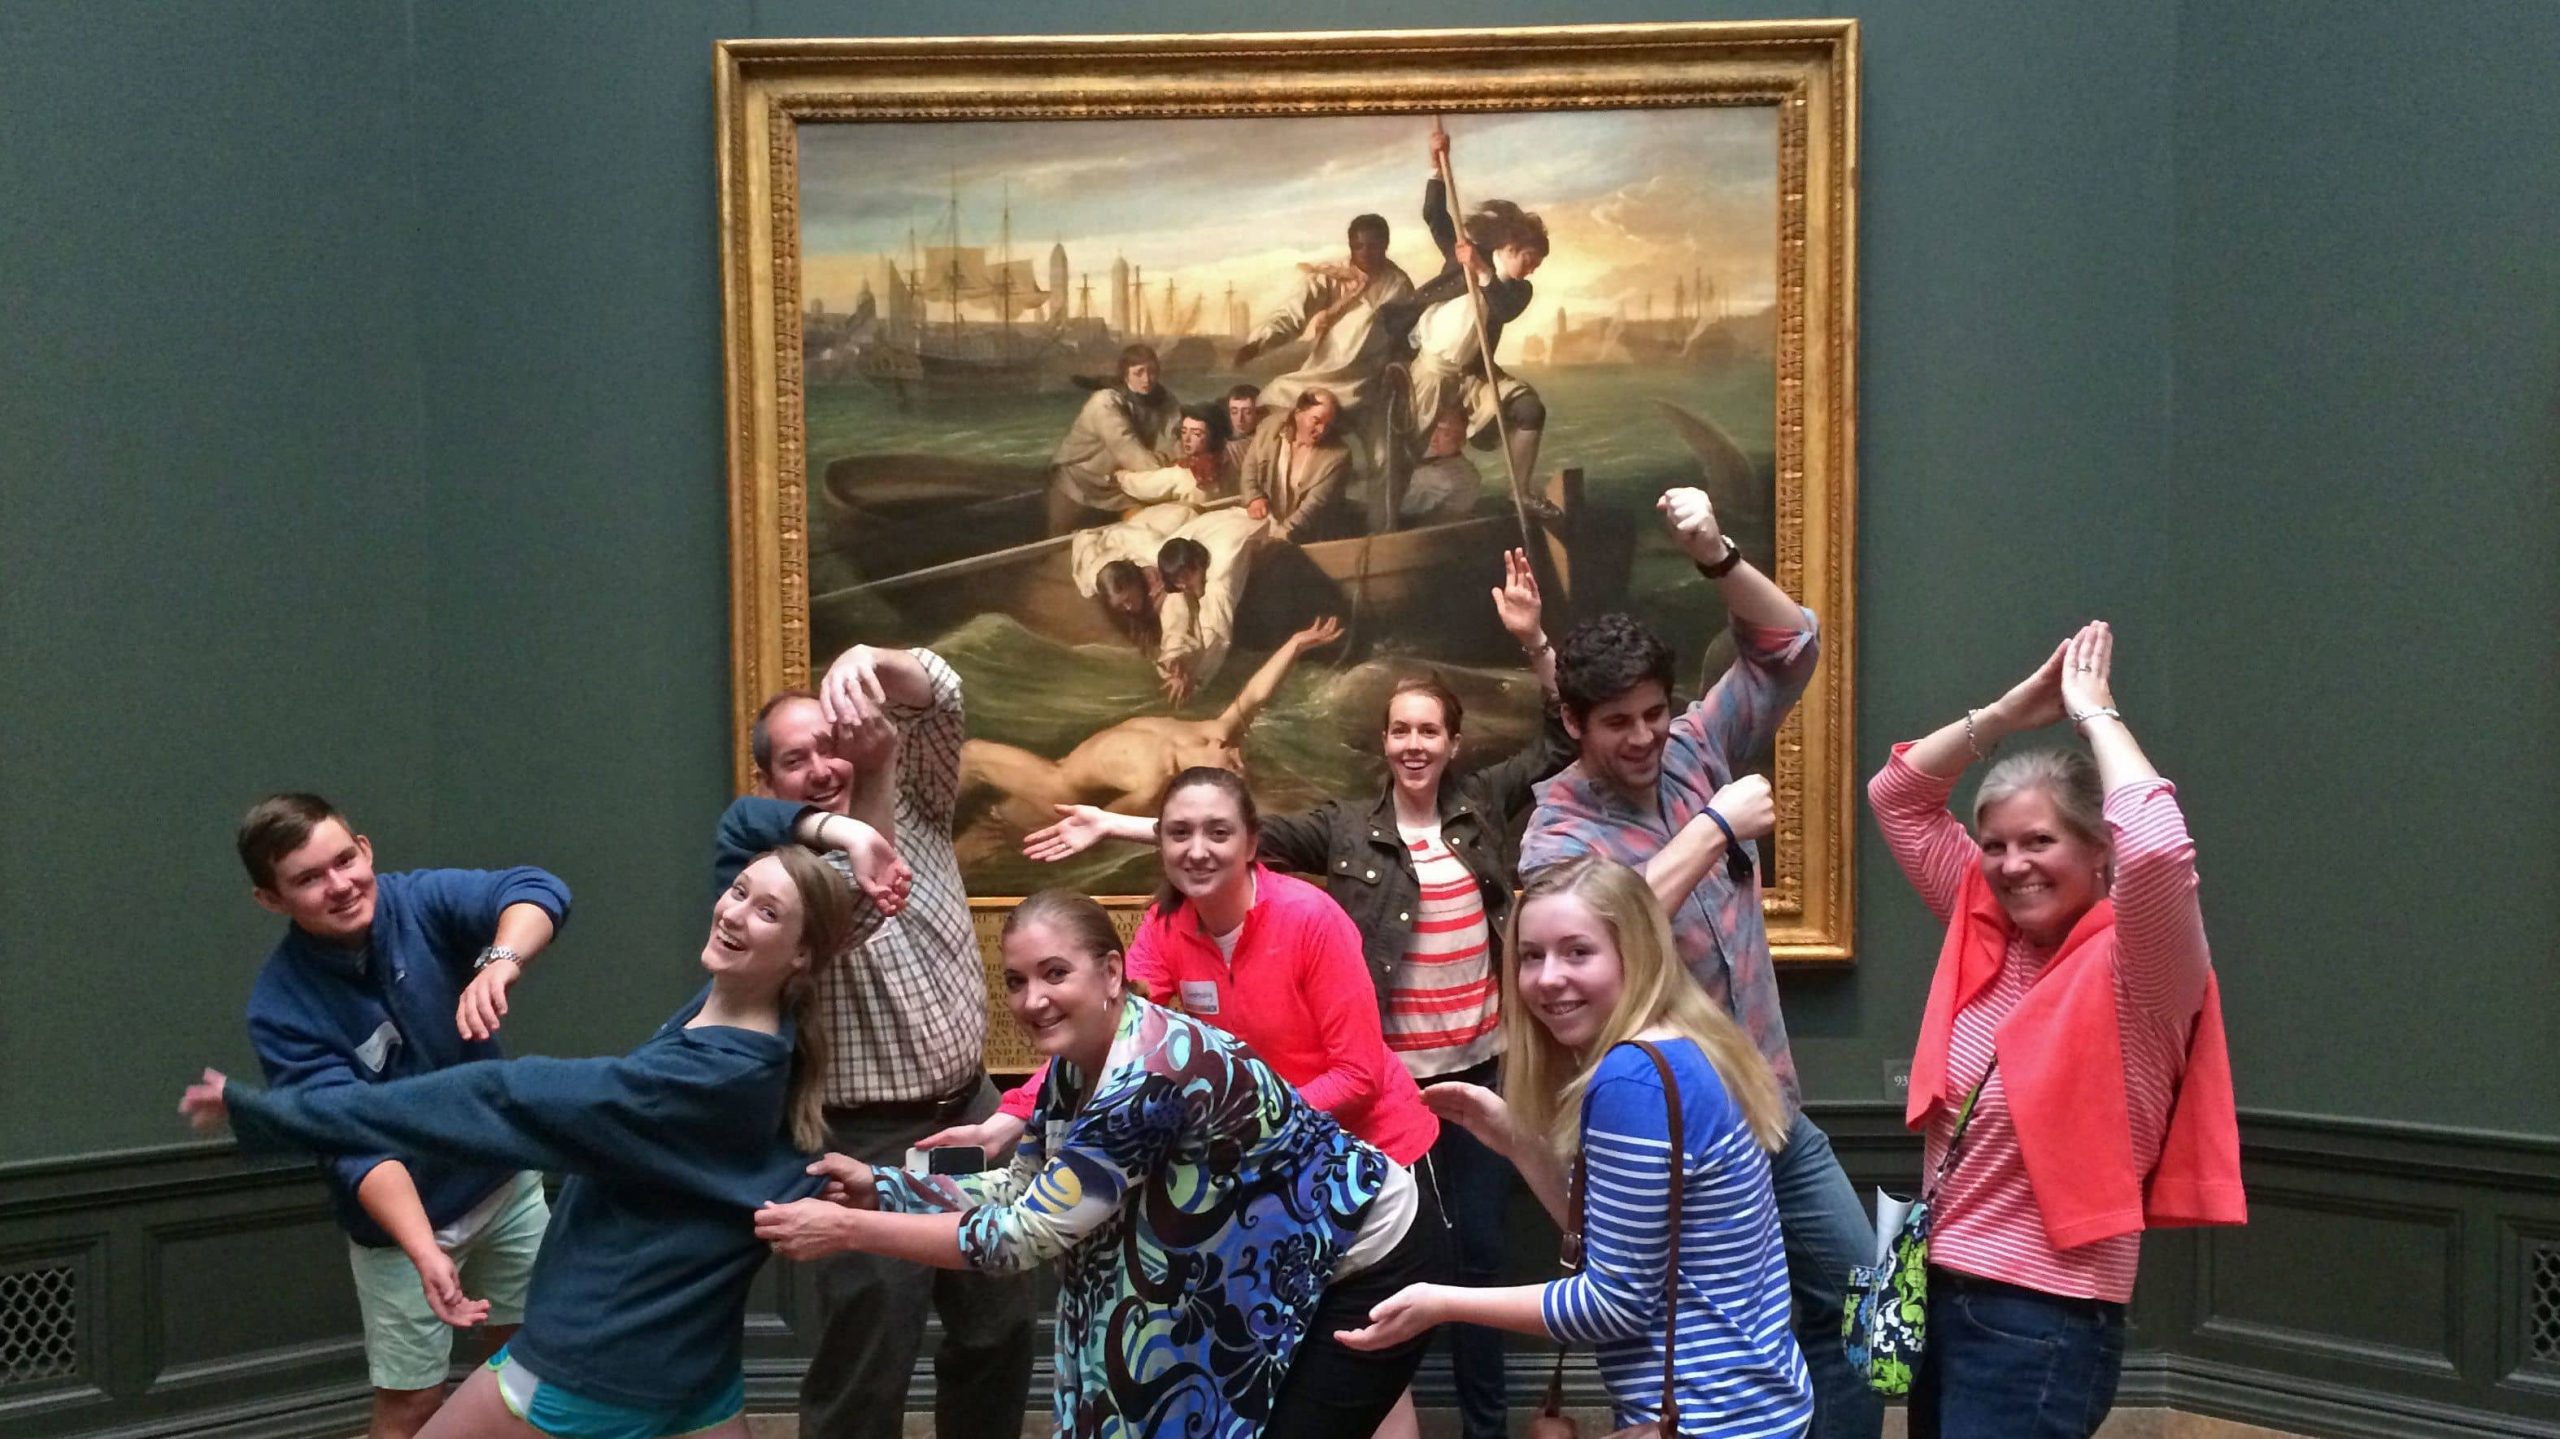 Group of people recreating a large painting in a museum behind them